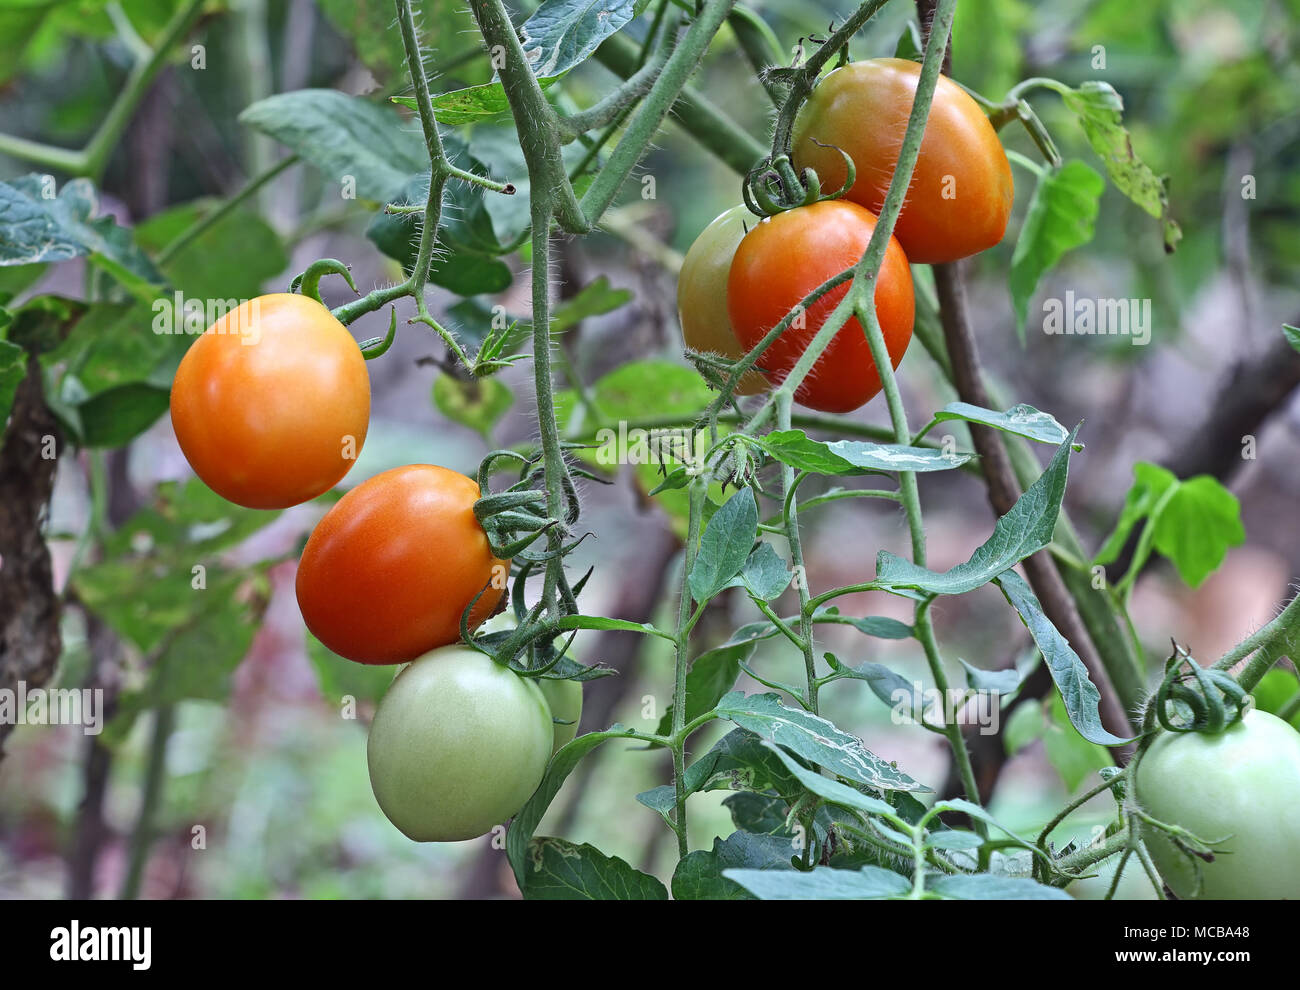 Ripe and Unripe tomato fruits growing in plants in backyard kitchen garden in Kerala, India Stock Photo